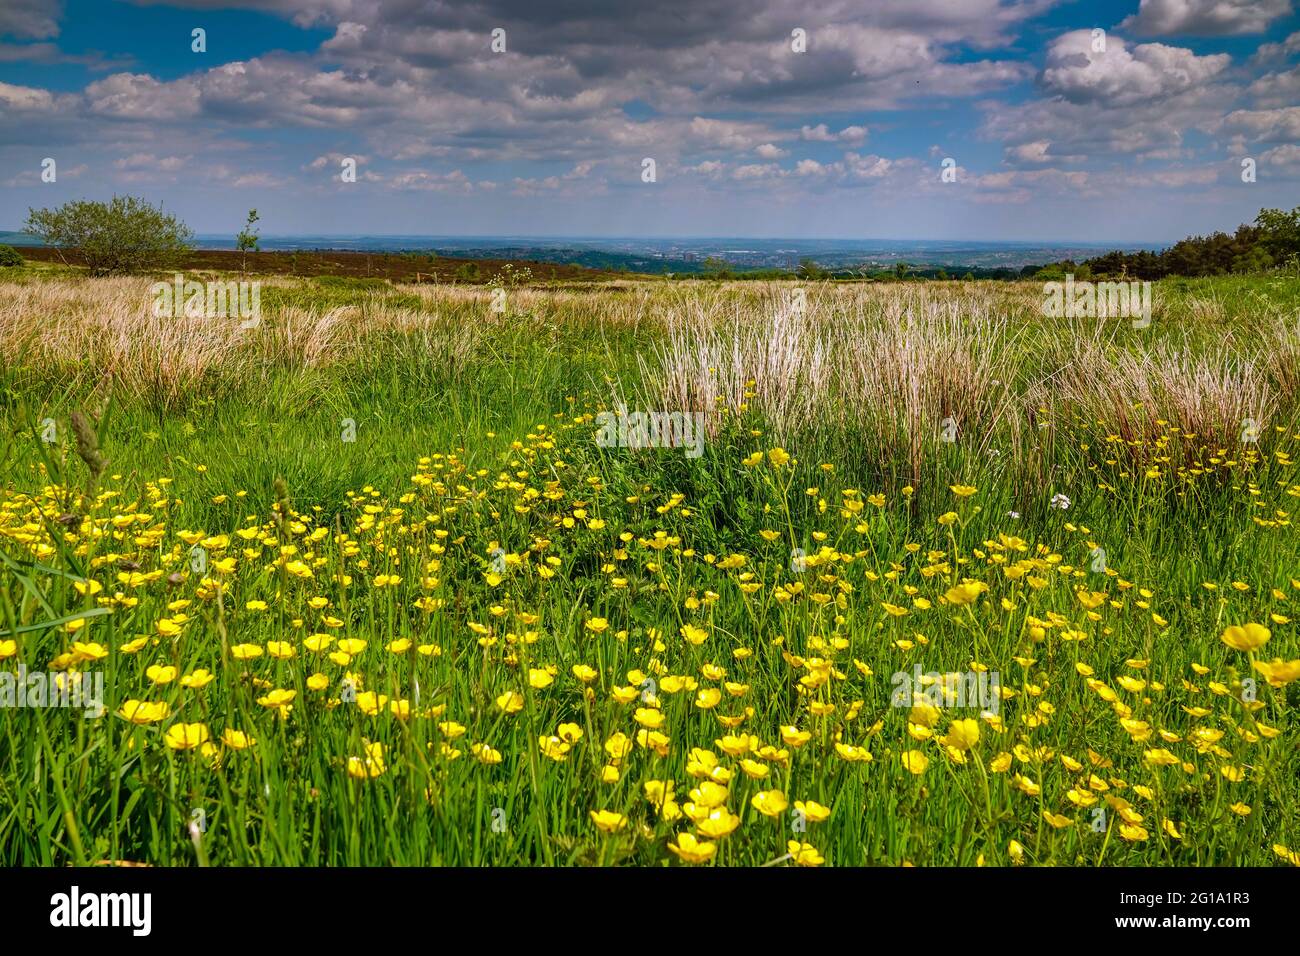 The green city of Sheffield, seen from the west, Ringinglow. South Yorkshire, North of England, UK with yellow buttercups in the foreground Stock Photo